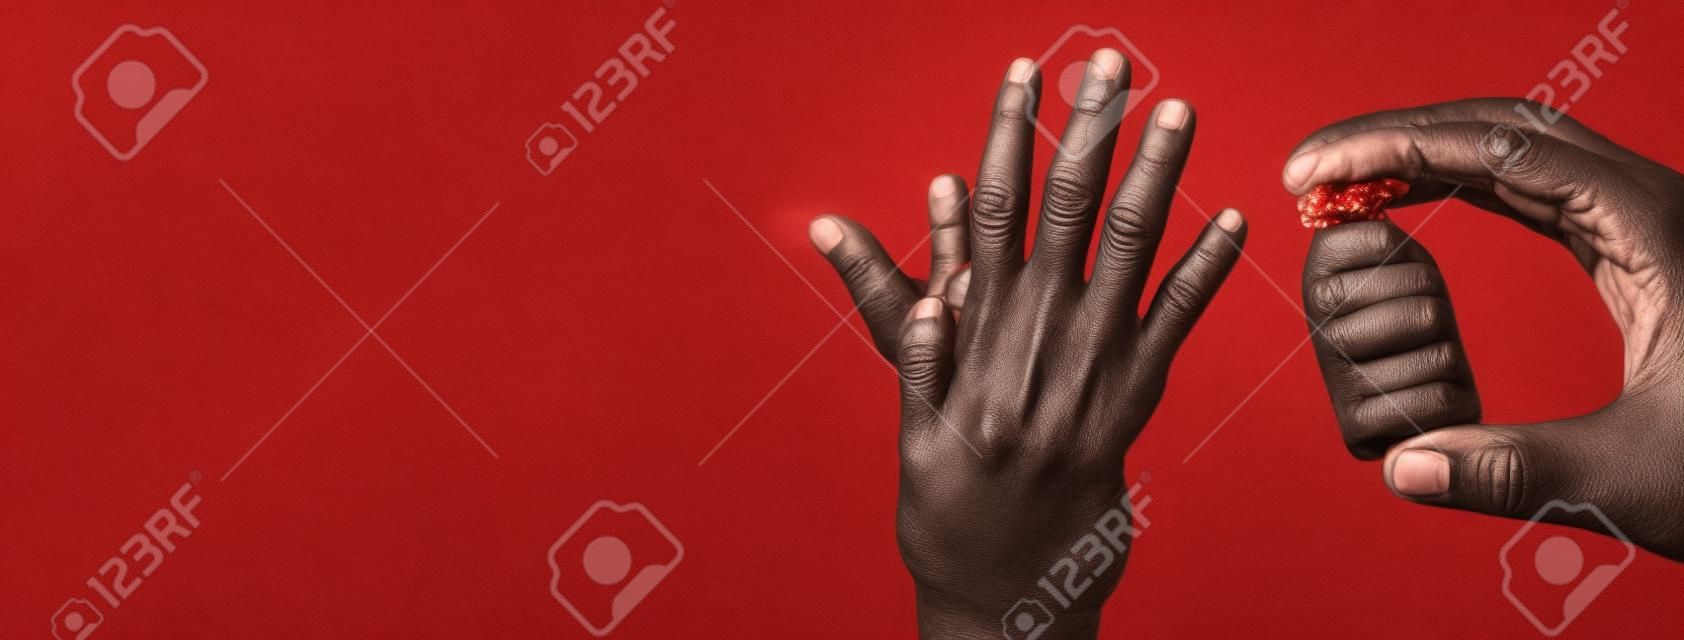 Doctors hand holding monkeypox vaccine with male hand affected by blistering rash because of monkeypox on red background.